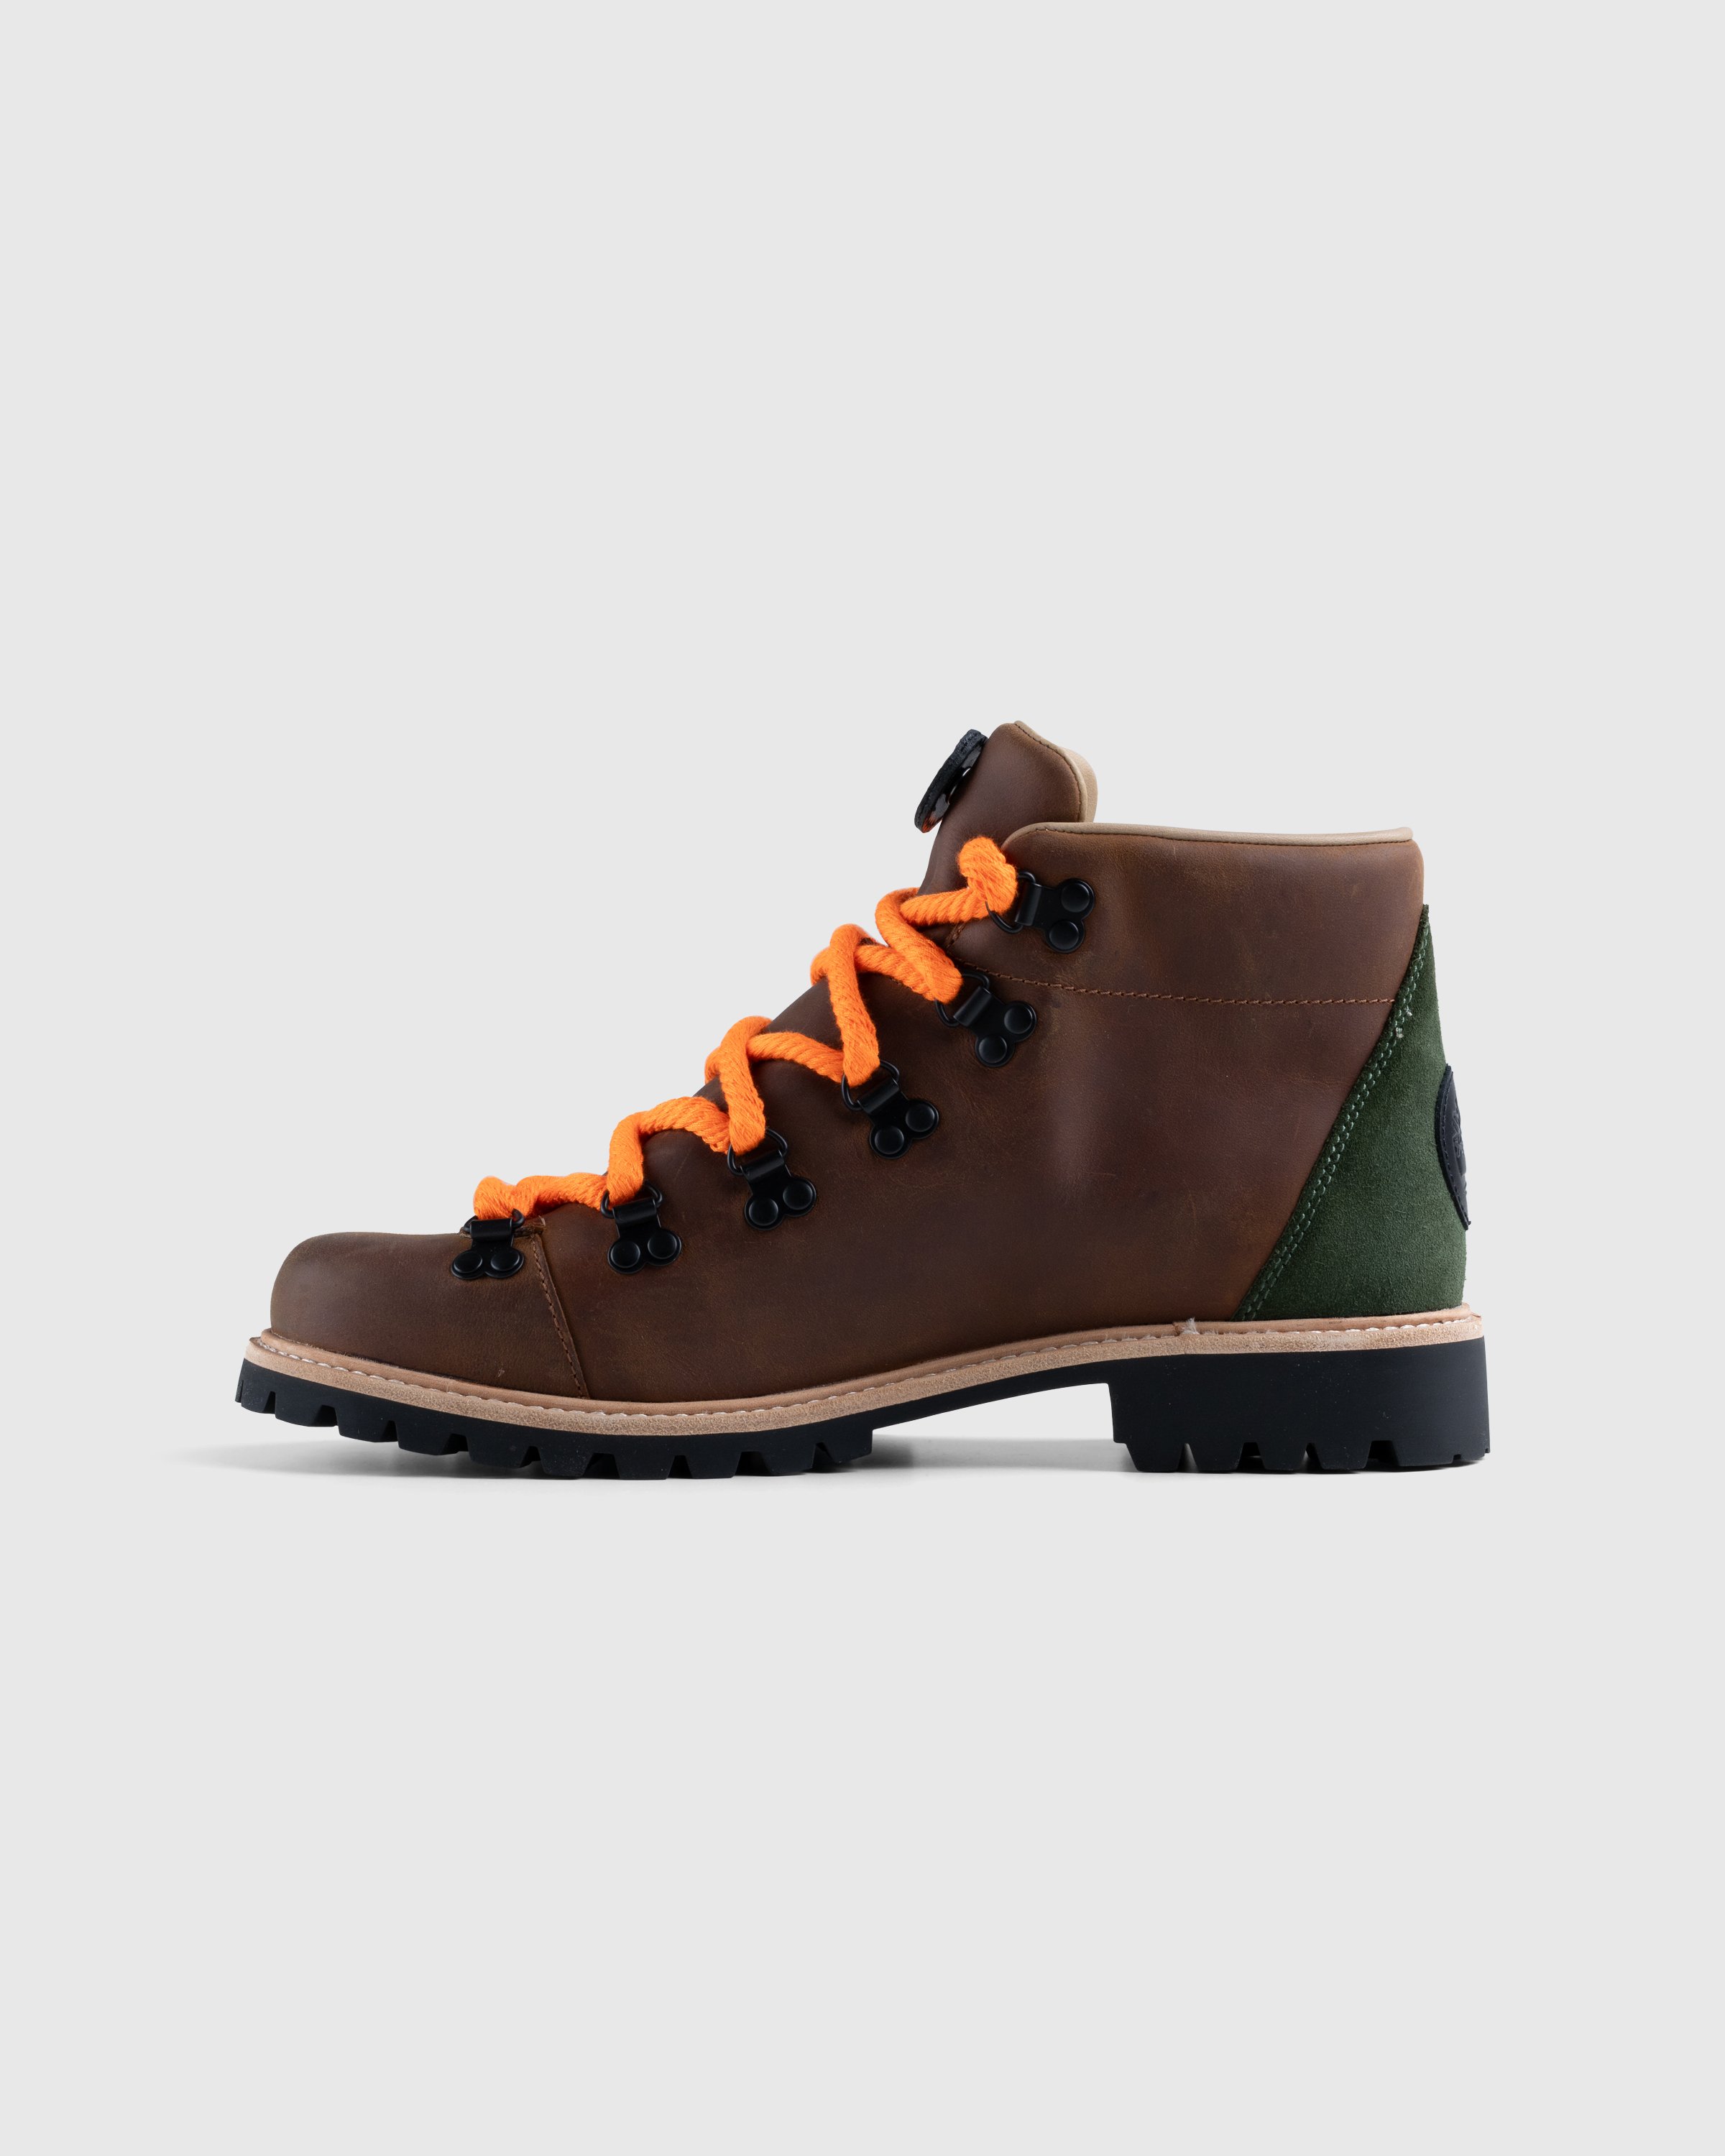 Timberland x Nina Chanel - MID LACE UP BOOT SADDLE - Footwear - Brown - Image 2